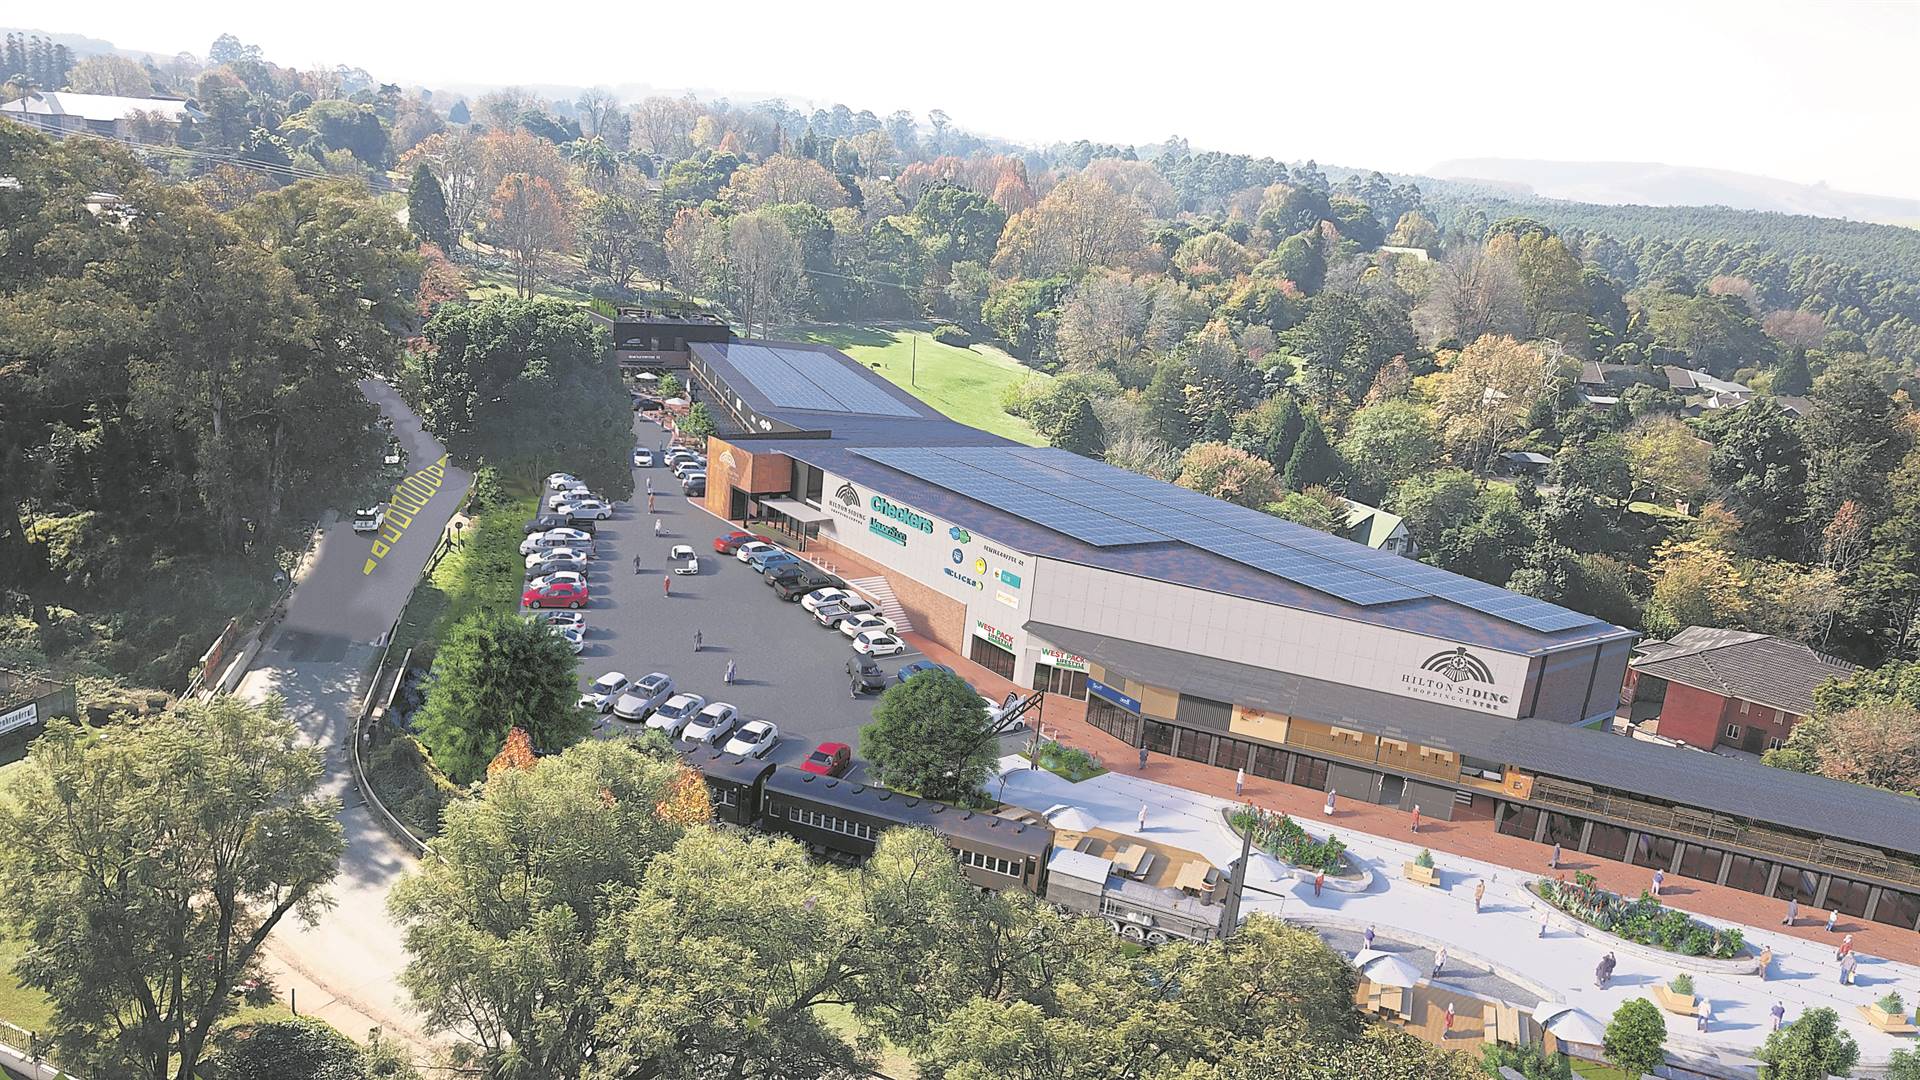 An artist’s impression of the Hilton Siding Shopping CentrePHOTO: SUPPLIED